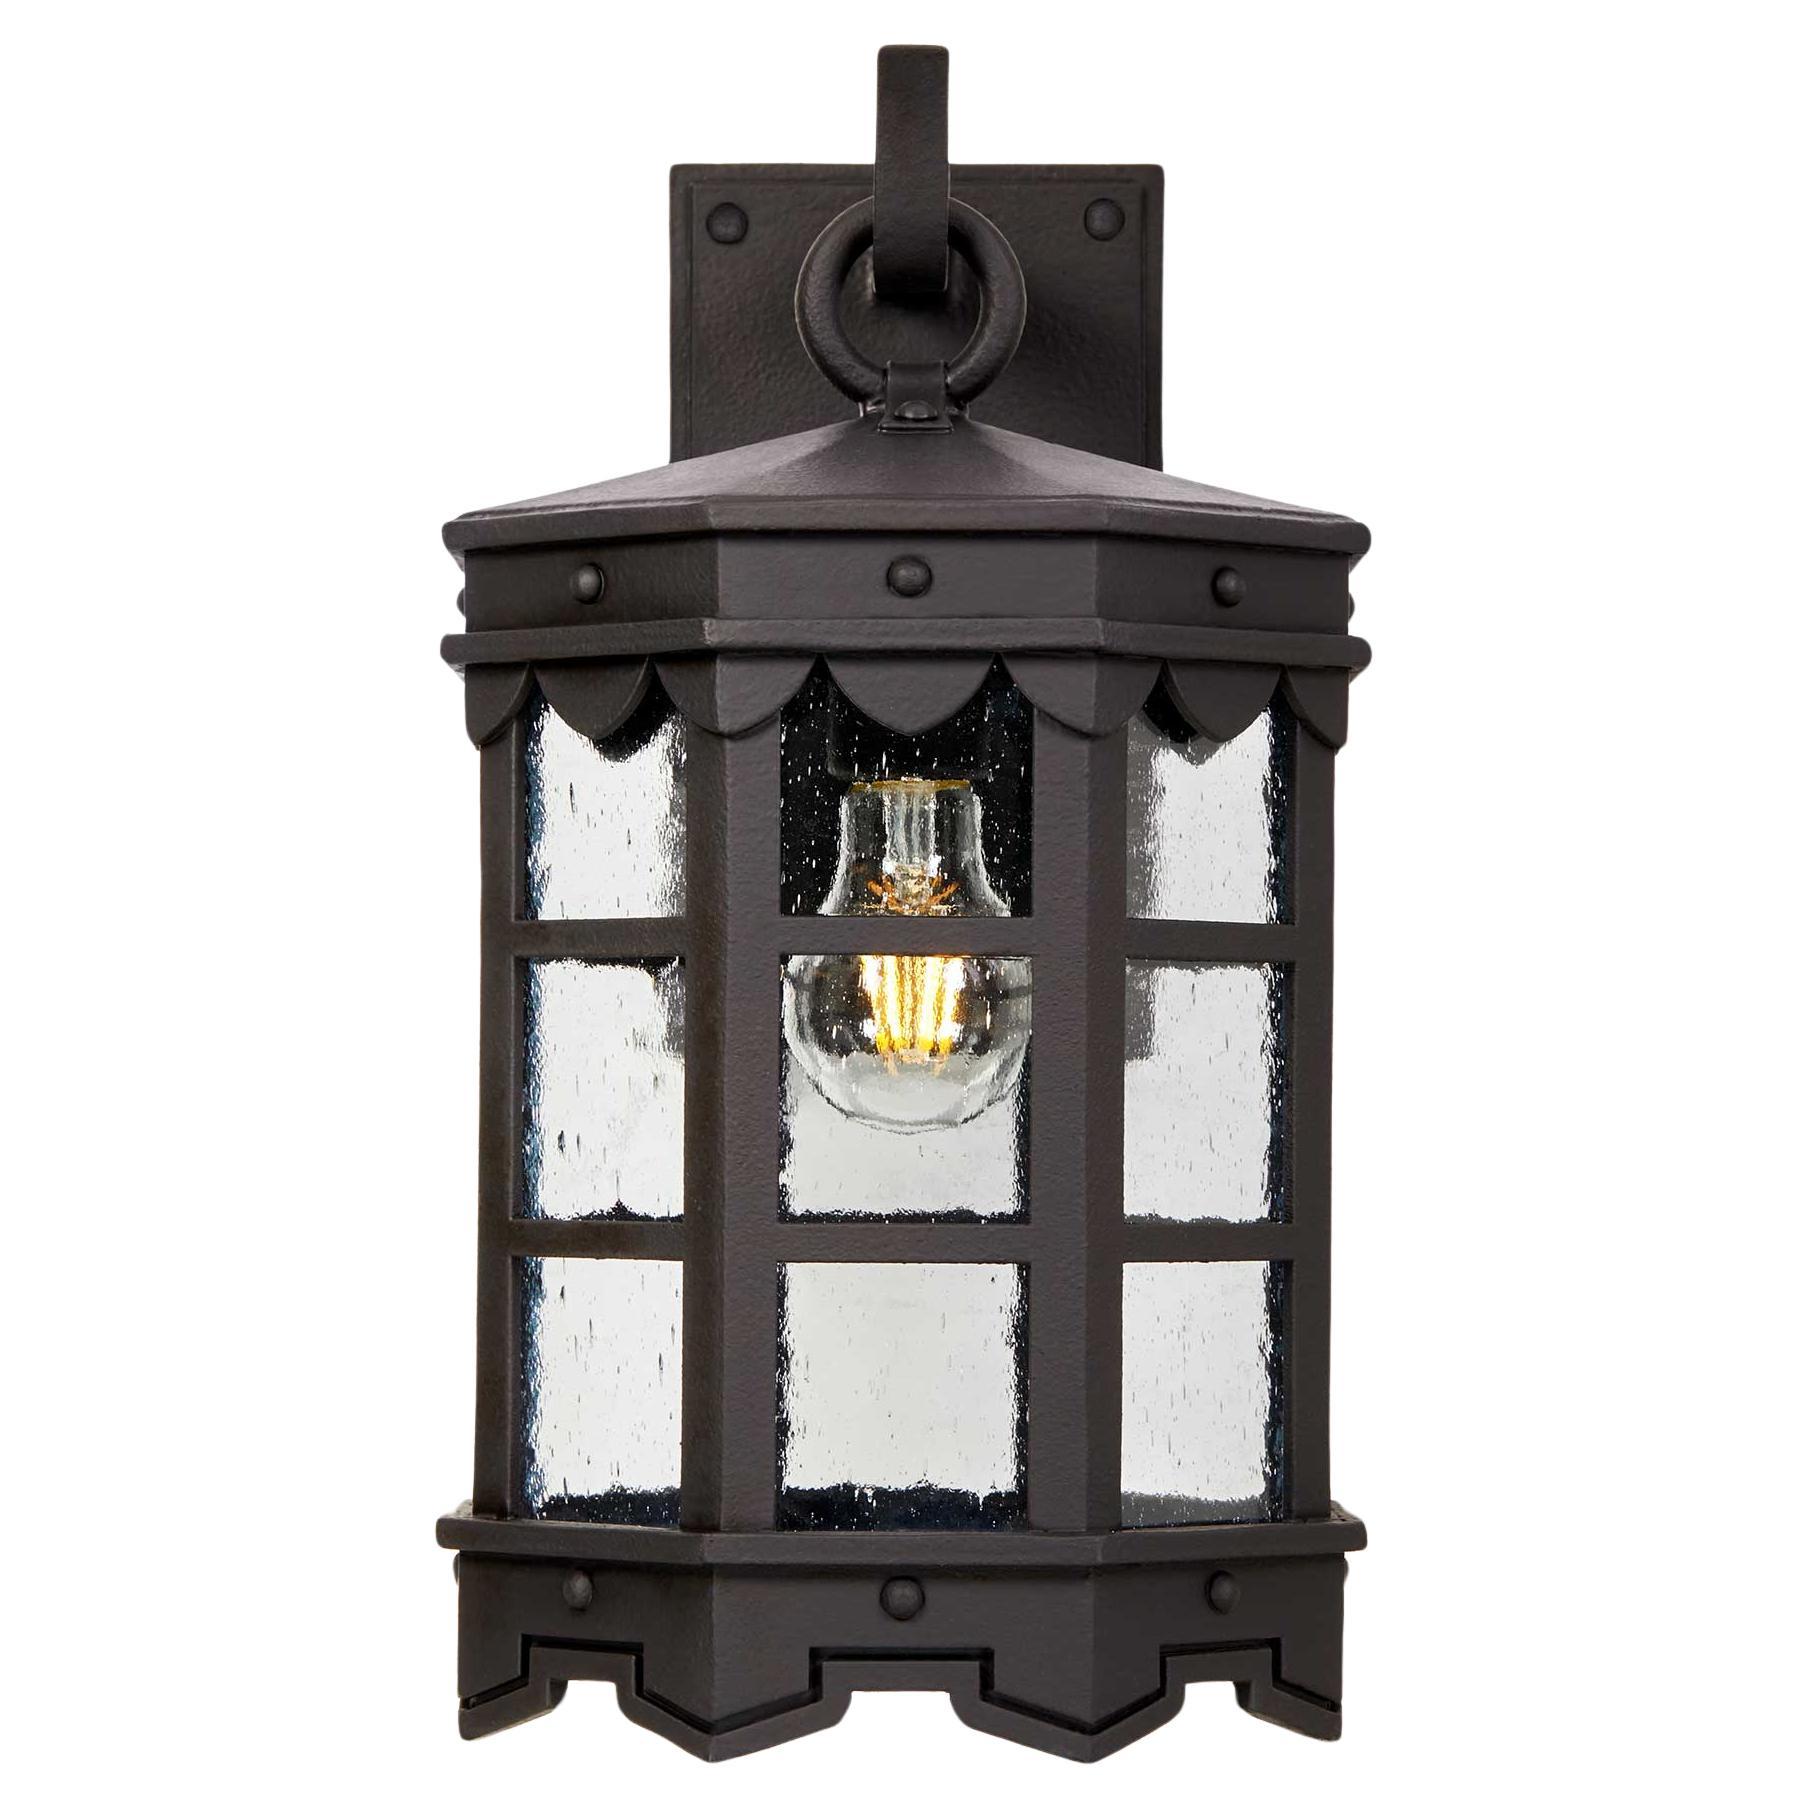 Mediterranean Wrought Iron Exterior Lantern Wall Sconce, Brown (Old World)  For Sale